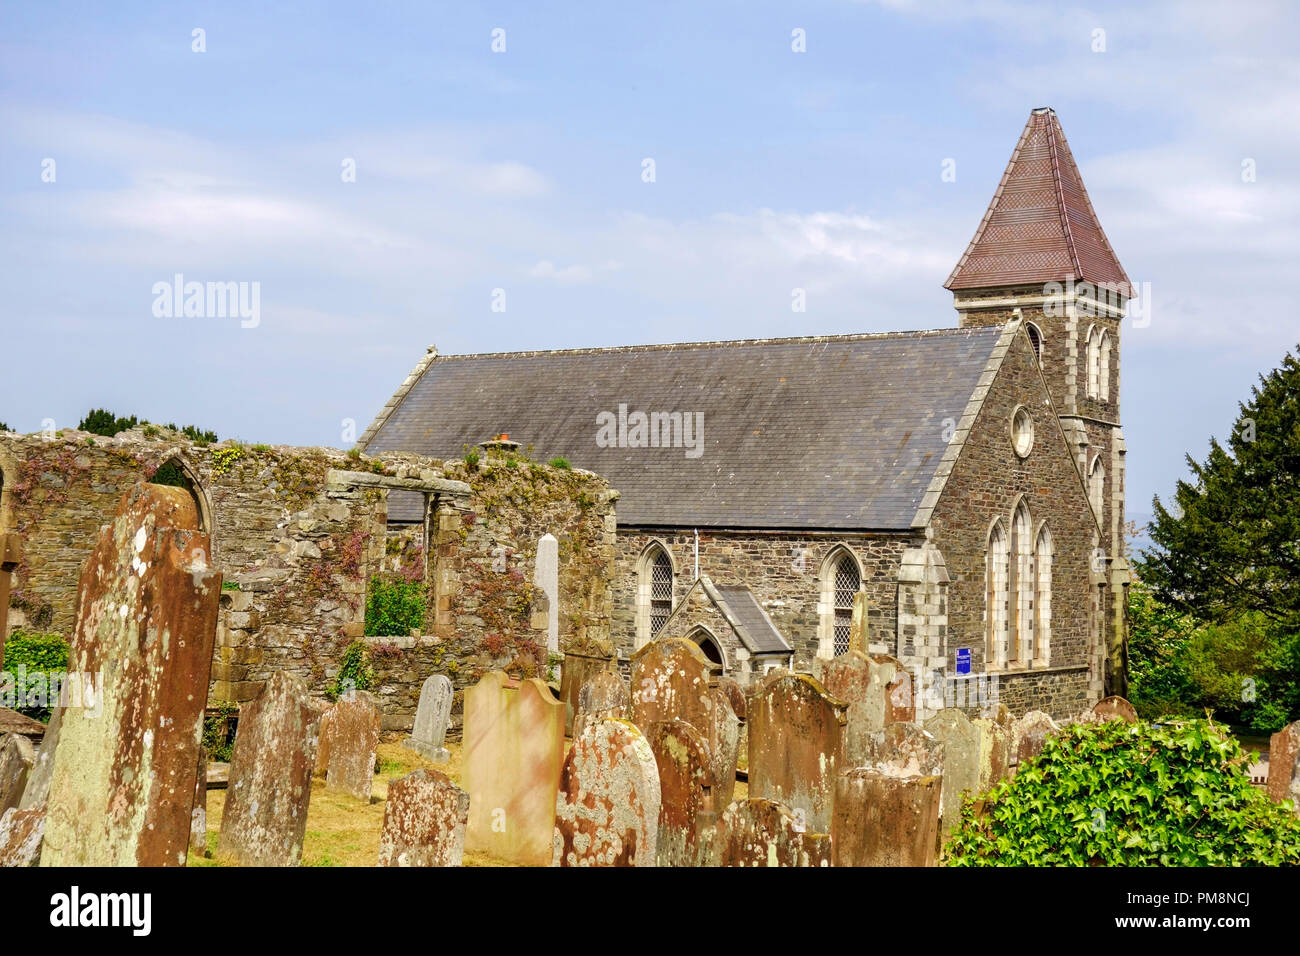 Wigtown Parish Church in Wigtown, Dumfries and Galloway, Scotland, UK. Built in 1851 next to much older church. Stock Photo